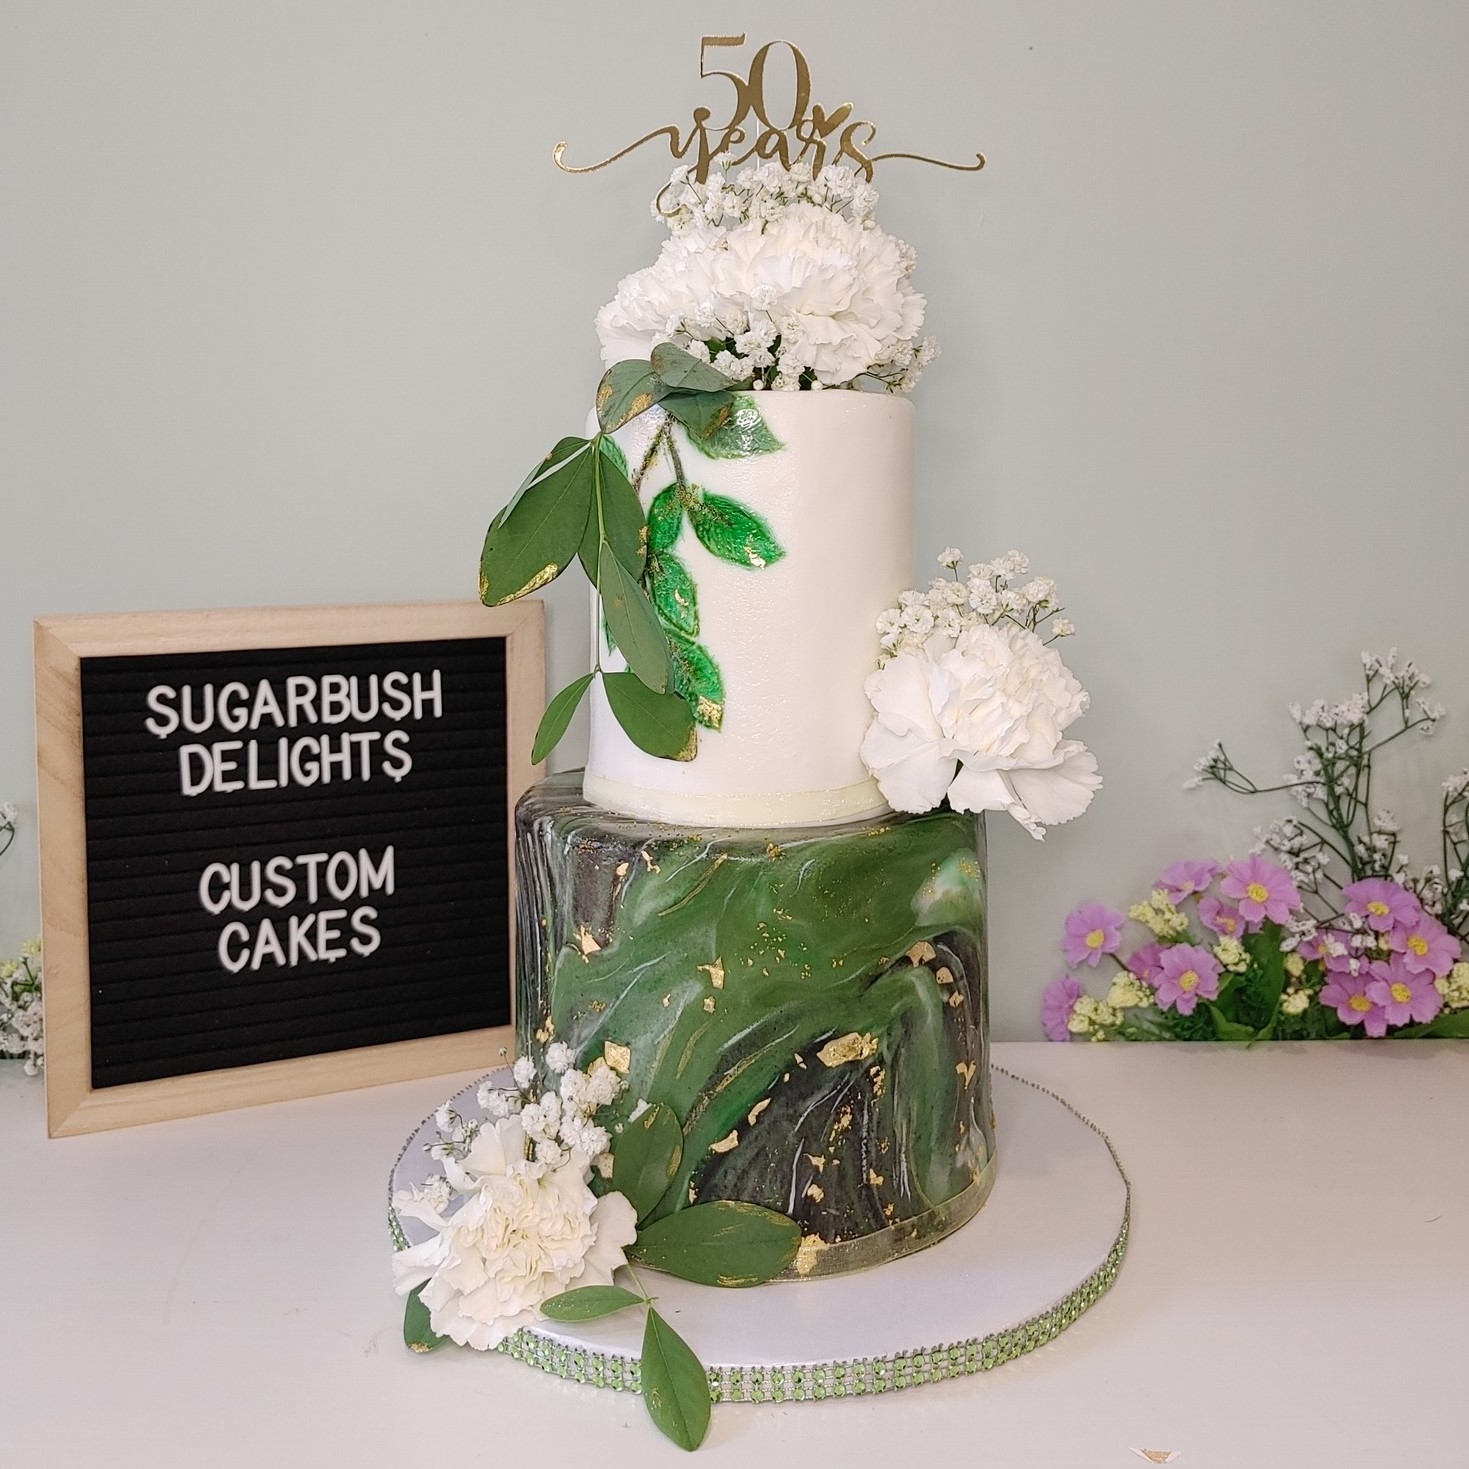 A tall 2 tier cake with white flowers and green leaves. The top tier is white and the bottom tier is green and black marble. There's a cake topper that says 50 years.